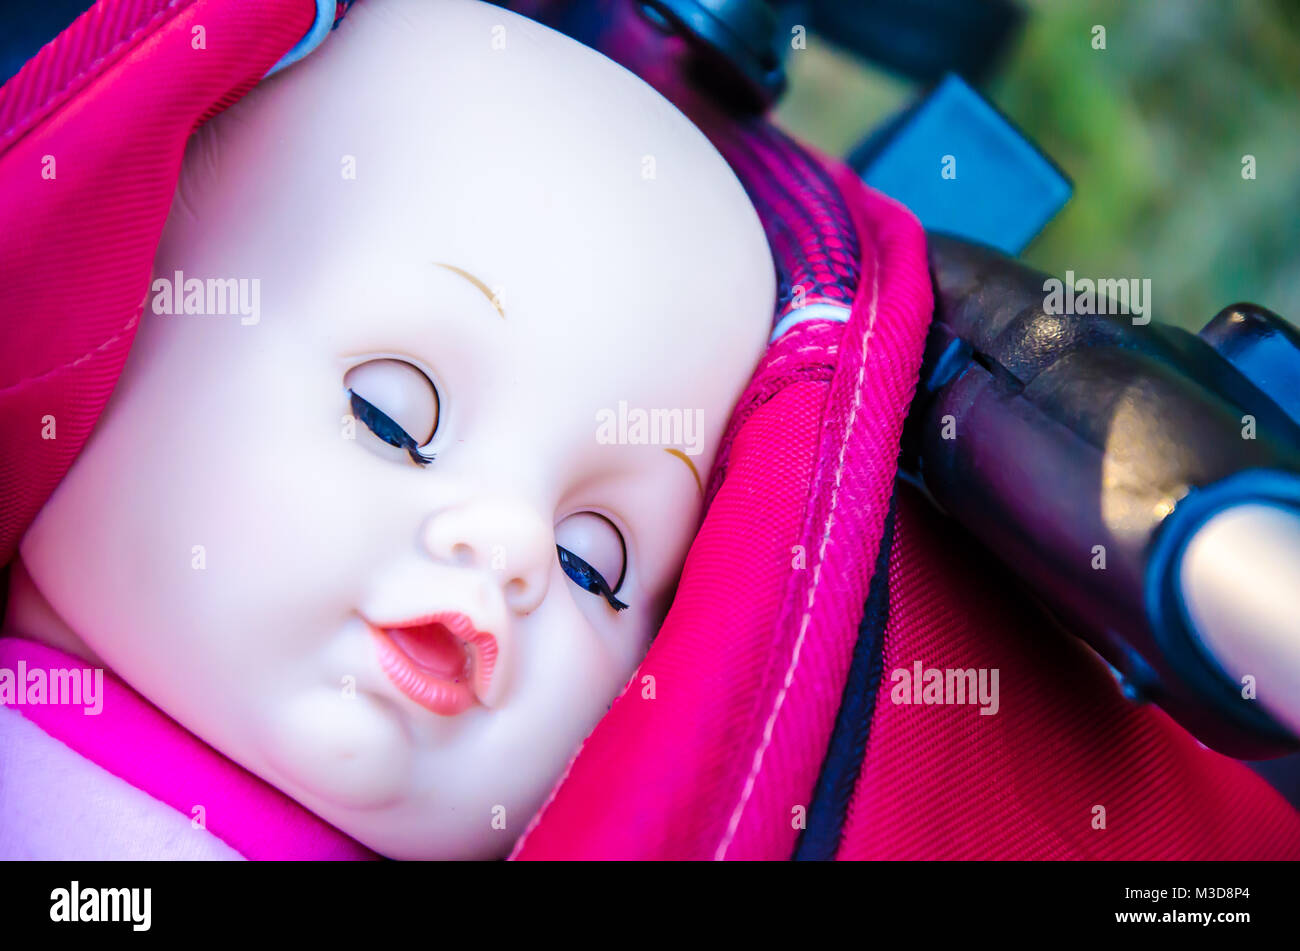 Close-up view of face doll with eyes closed in pram Stock Photo